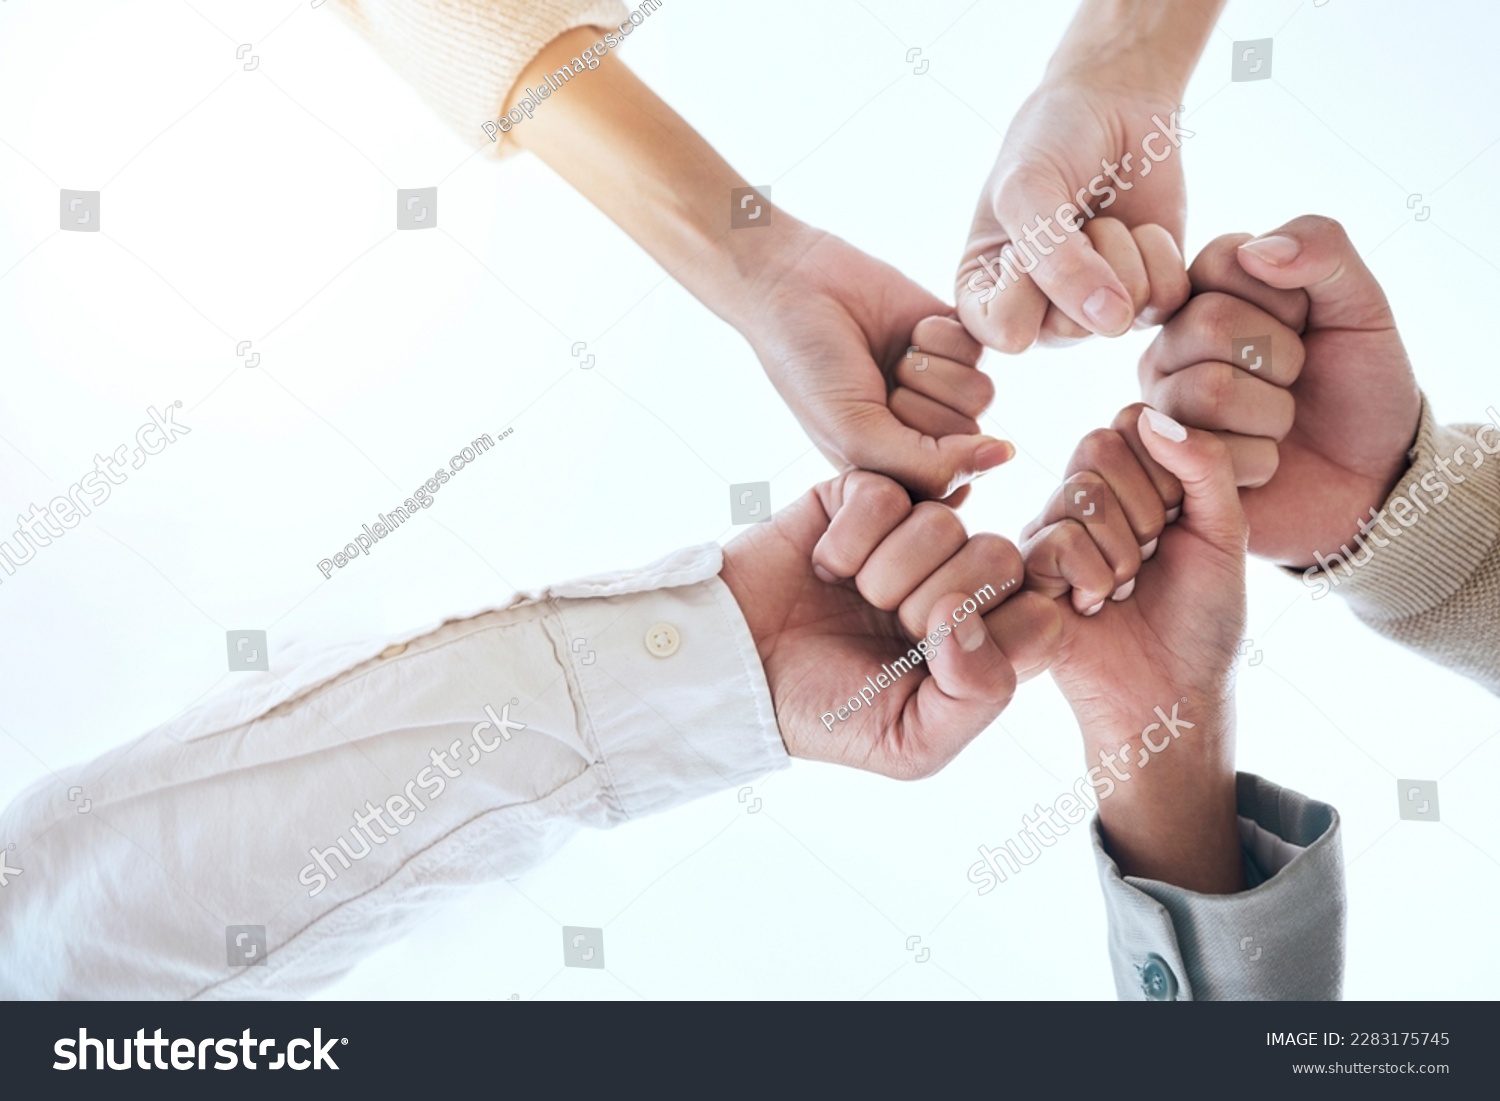 Below business people, fist bump and circle for team building, support and group goals in workplace. Men, women and teamwork with solidarity for success, motivation and trust with diversity at job #2283175745